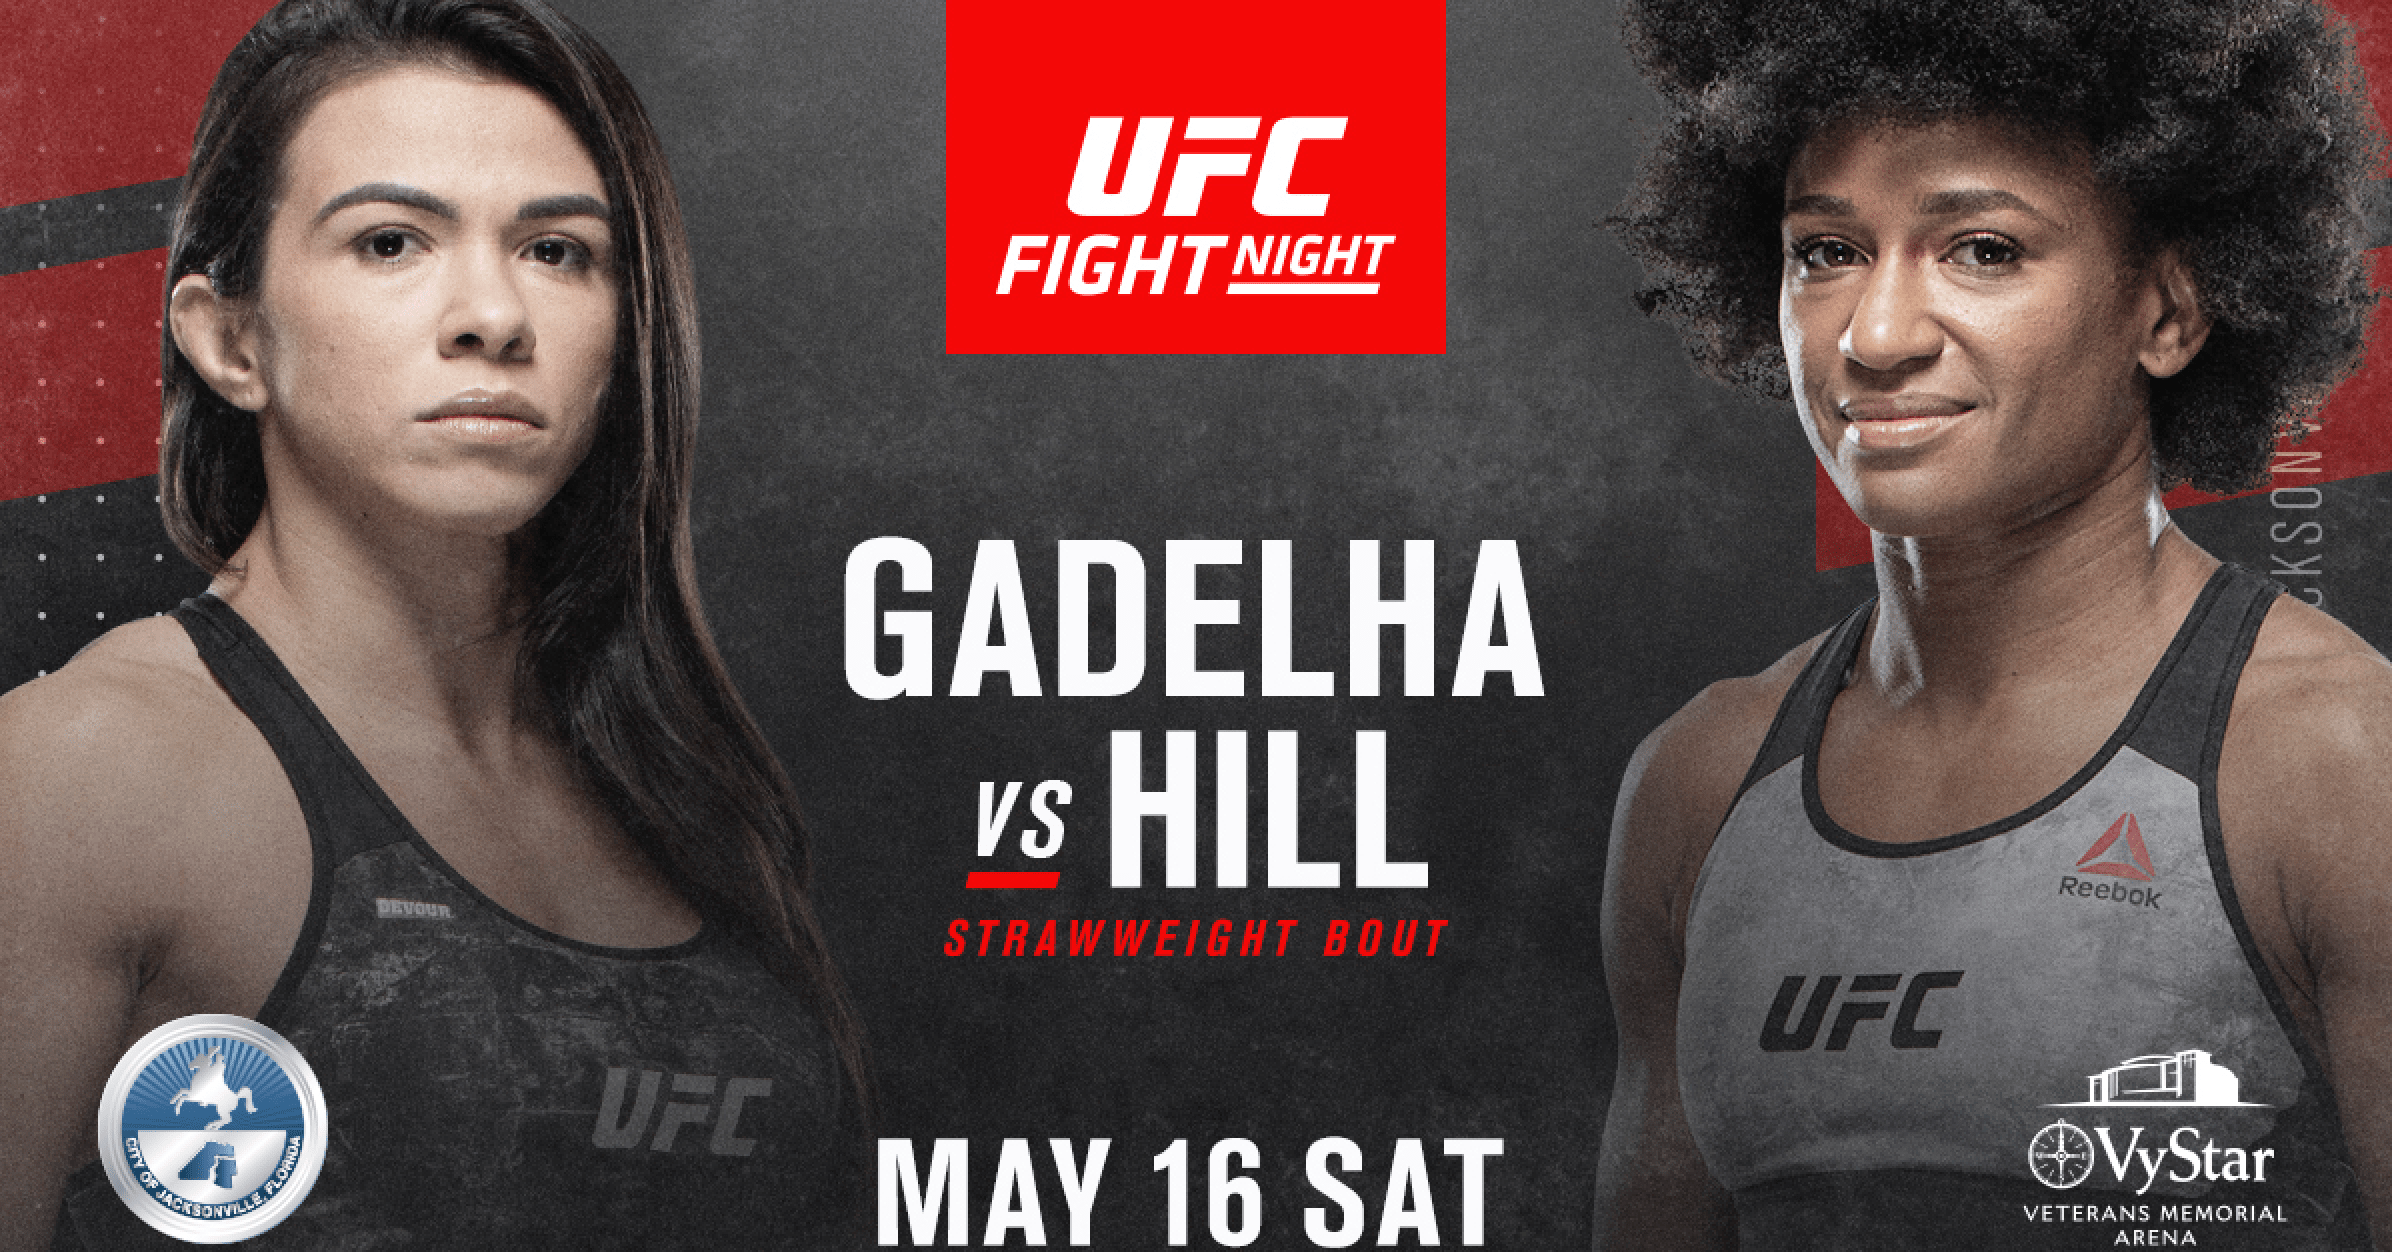 UFC Announce Lineups For May 13th And 16th Cards APMMA